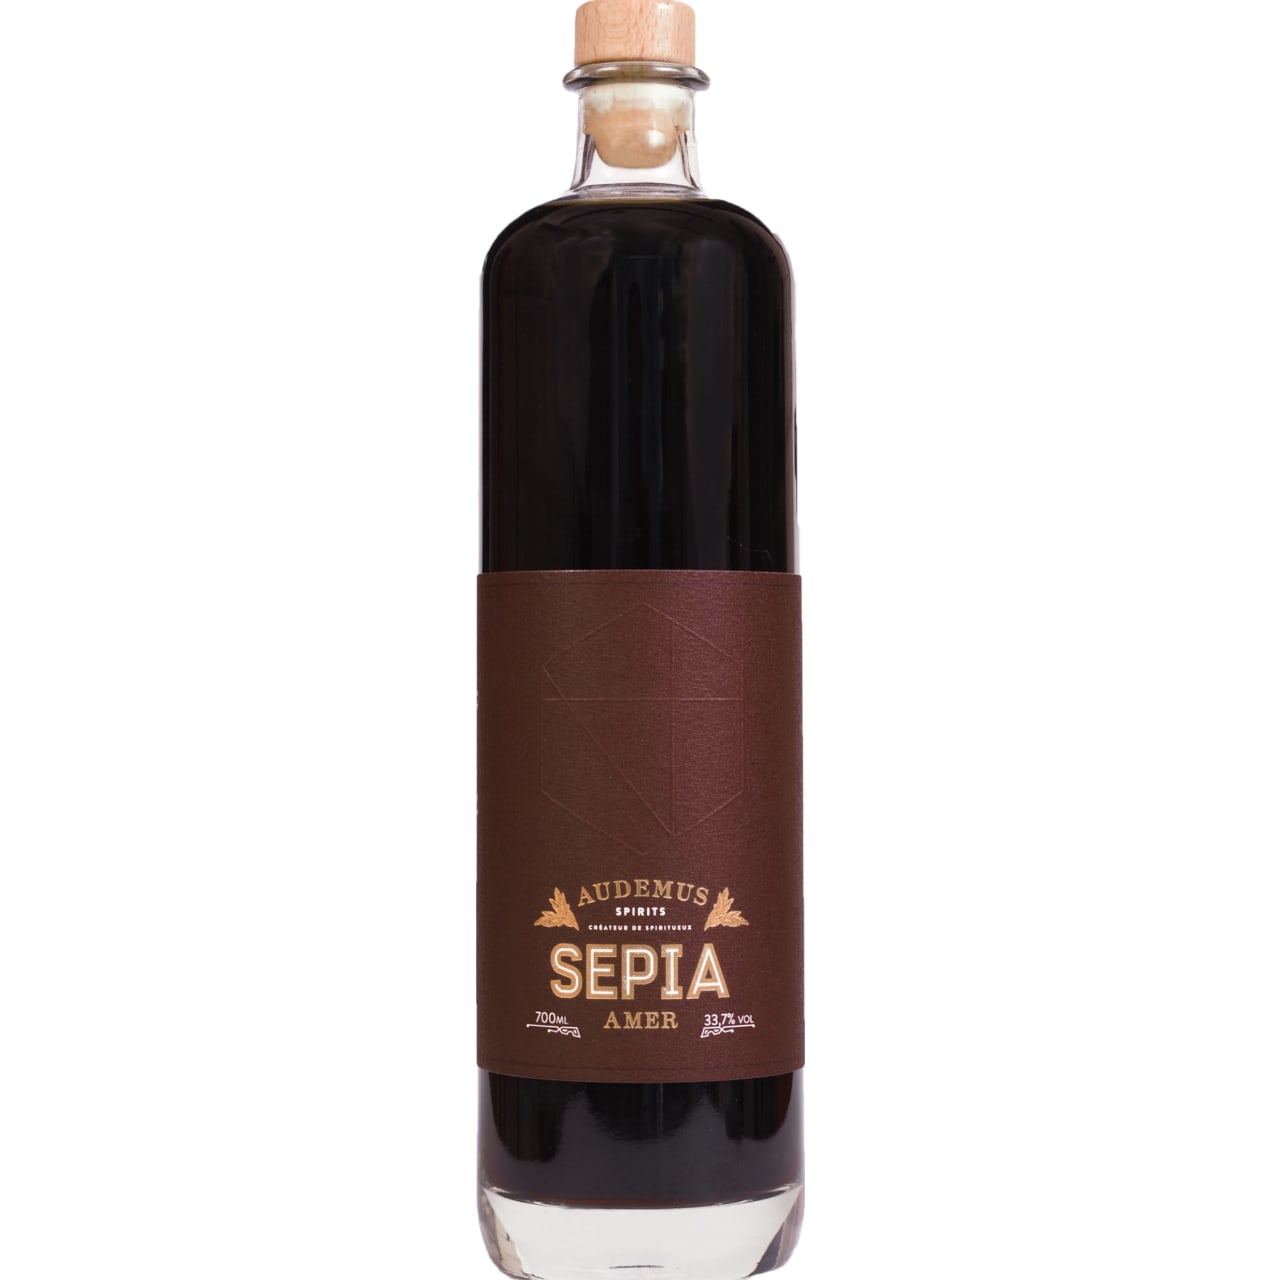 A rich, dark and complex addition to the Audemus stable, Sepia is a traditional Italian Amer with a bit of modern thinking. A blend of chicory, orange and myrtle, along with the traditional 'secret blend of herbs and spices'.